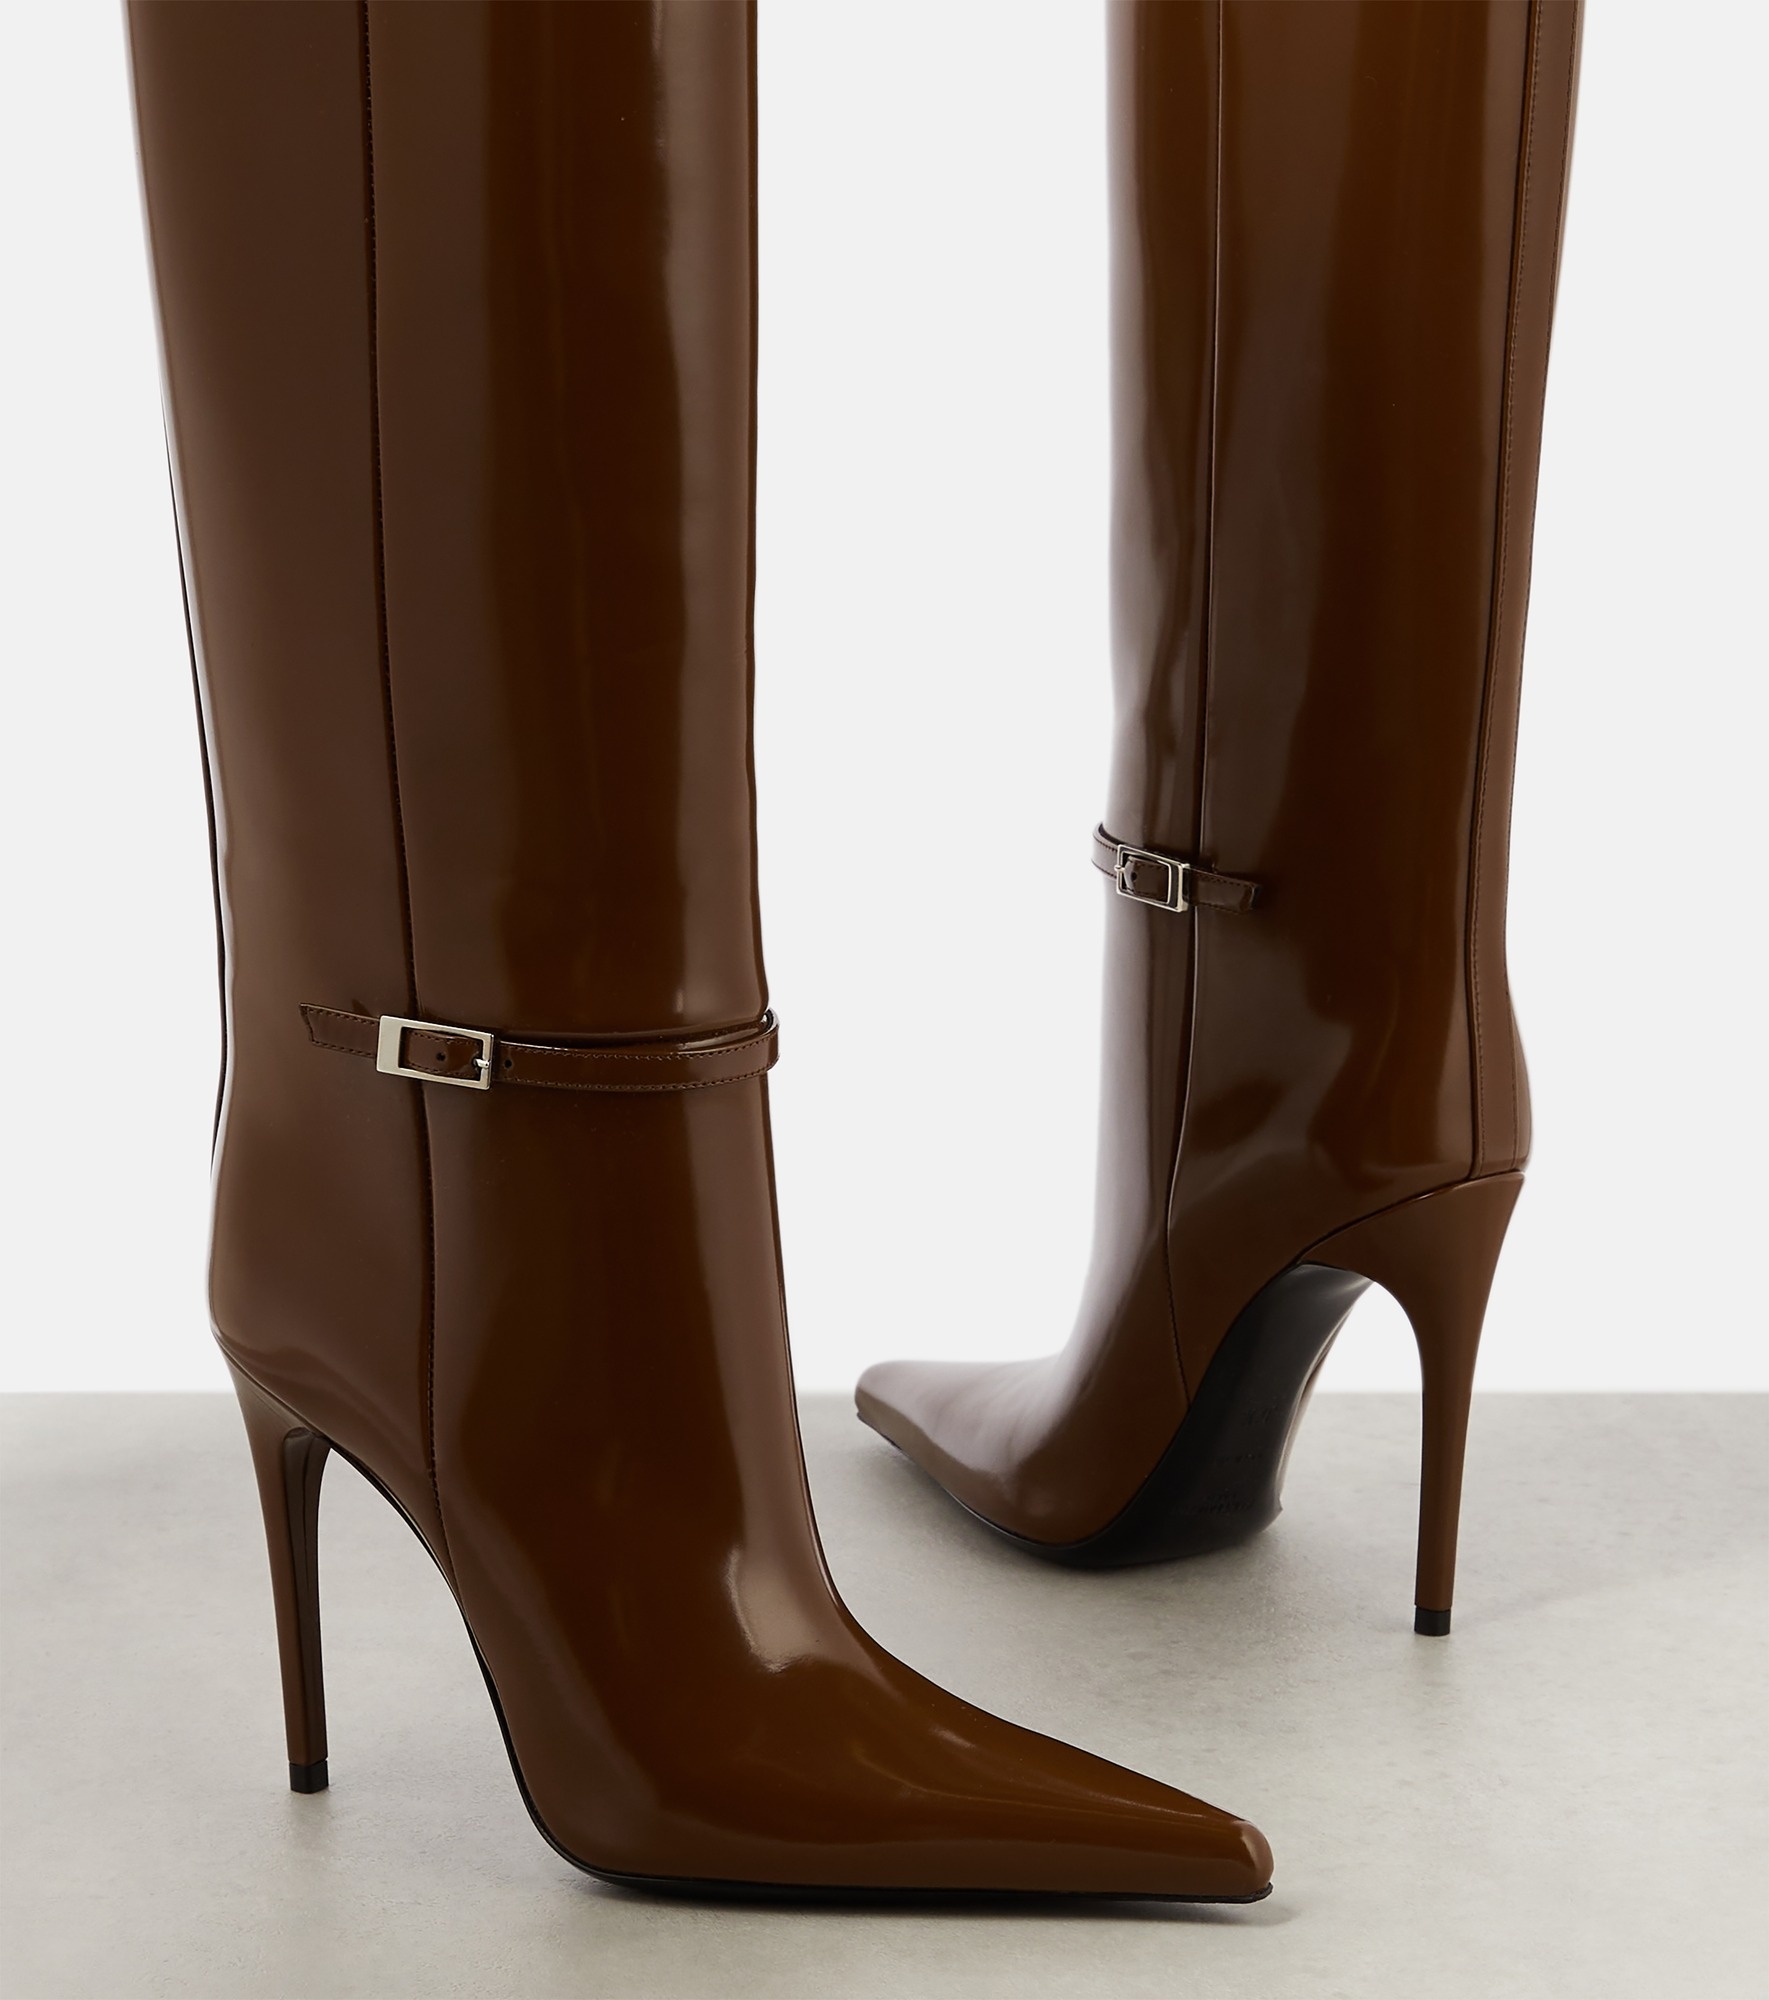 Nina over-the-knee boots in smooth stretch leather